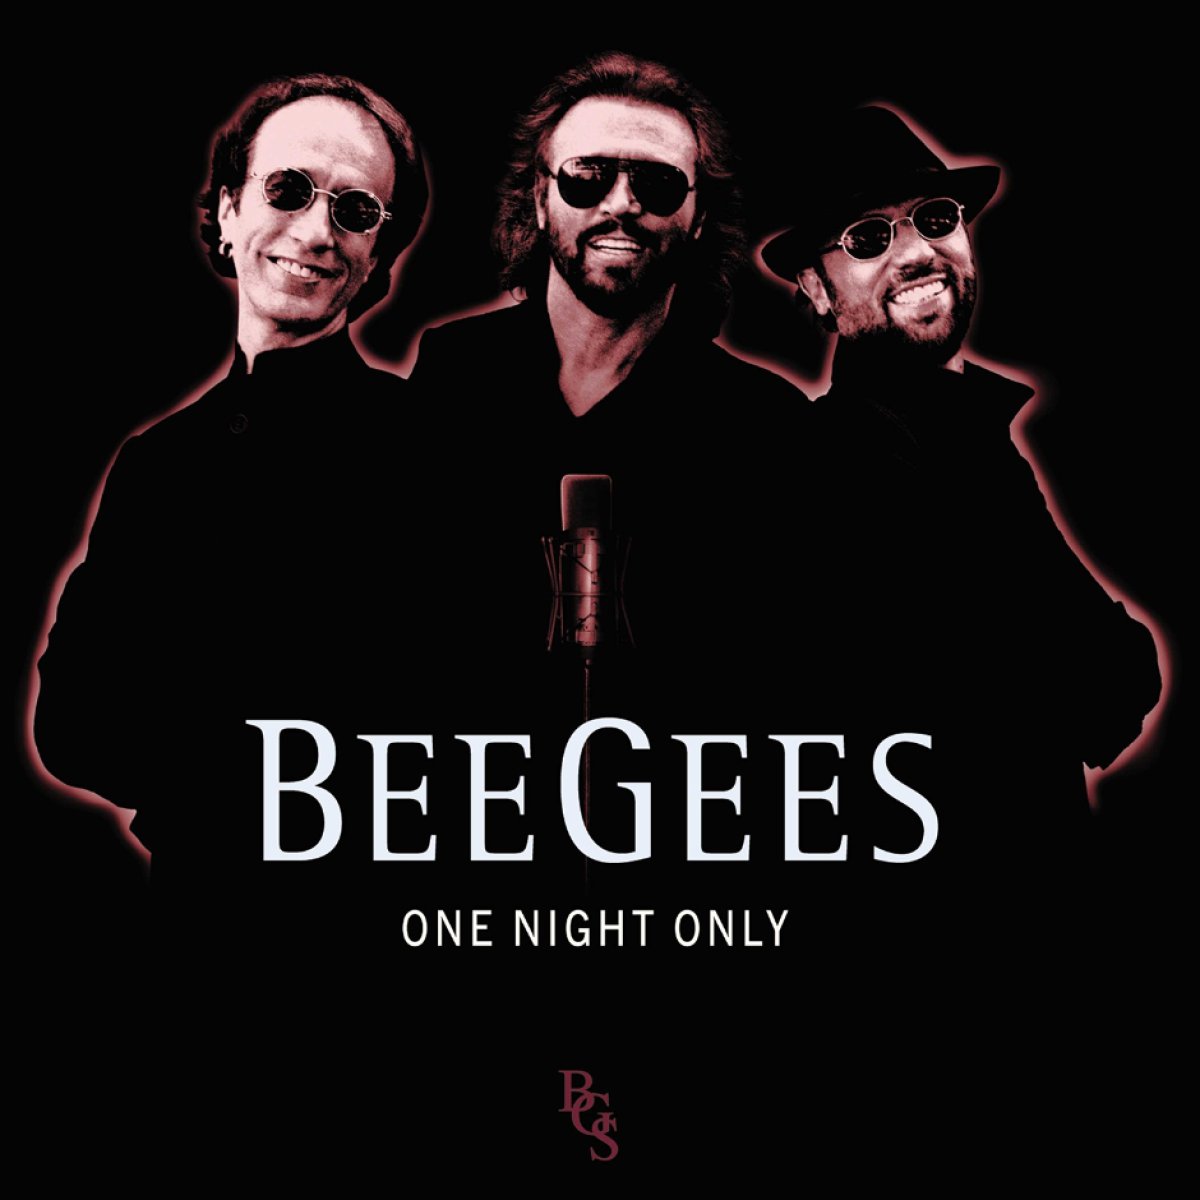 Bee Gees - One Night Only